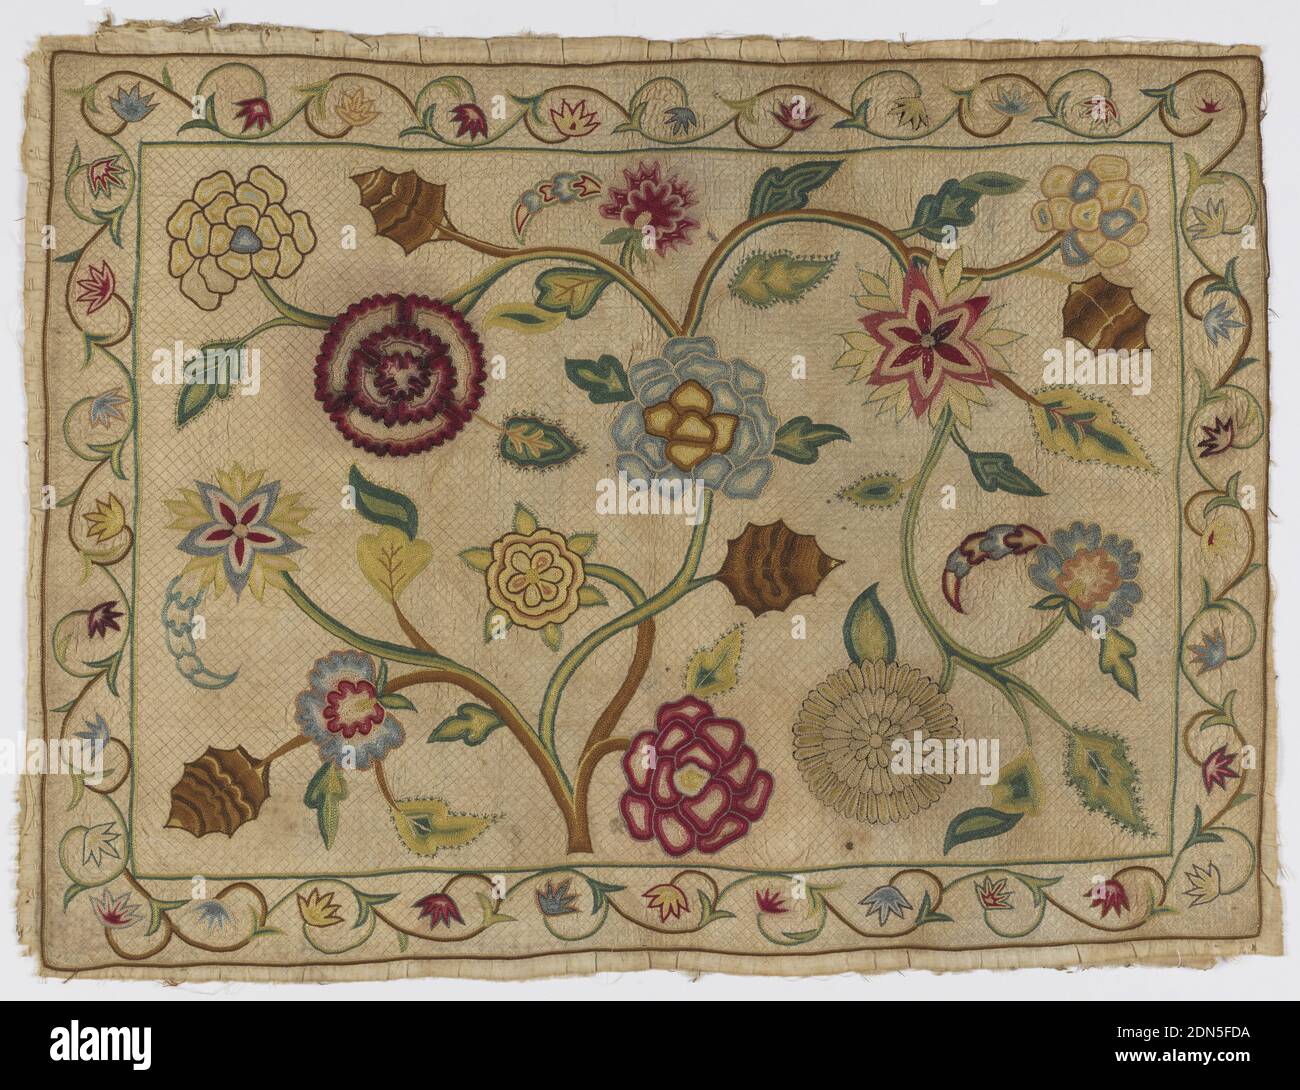 Pillow cover, Medium: silk on cotton Technique: chain, back, knot and stem stitch embroidery on plain weave; quilted, Horizontal panel filled with fantastic flower heads, leaves, spreading branches of a small flowering tree, narrow border on four sides with running floral scroll. In polychrome silk chain stitch on undyed cotton ground with fine quilting in beige silk outline stitch on diamond framework. Details in knot, buttonhole, outline sittch., England, ca. 1700, embroidery & stitching, Pillow cover Stock Photo